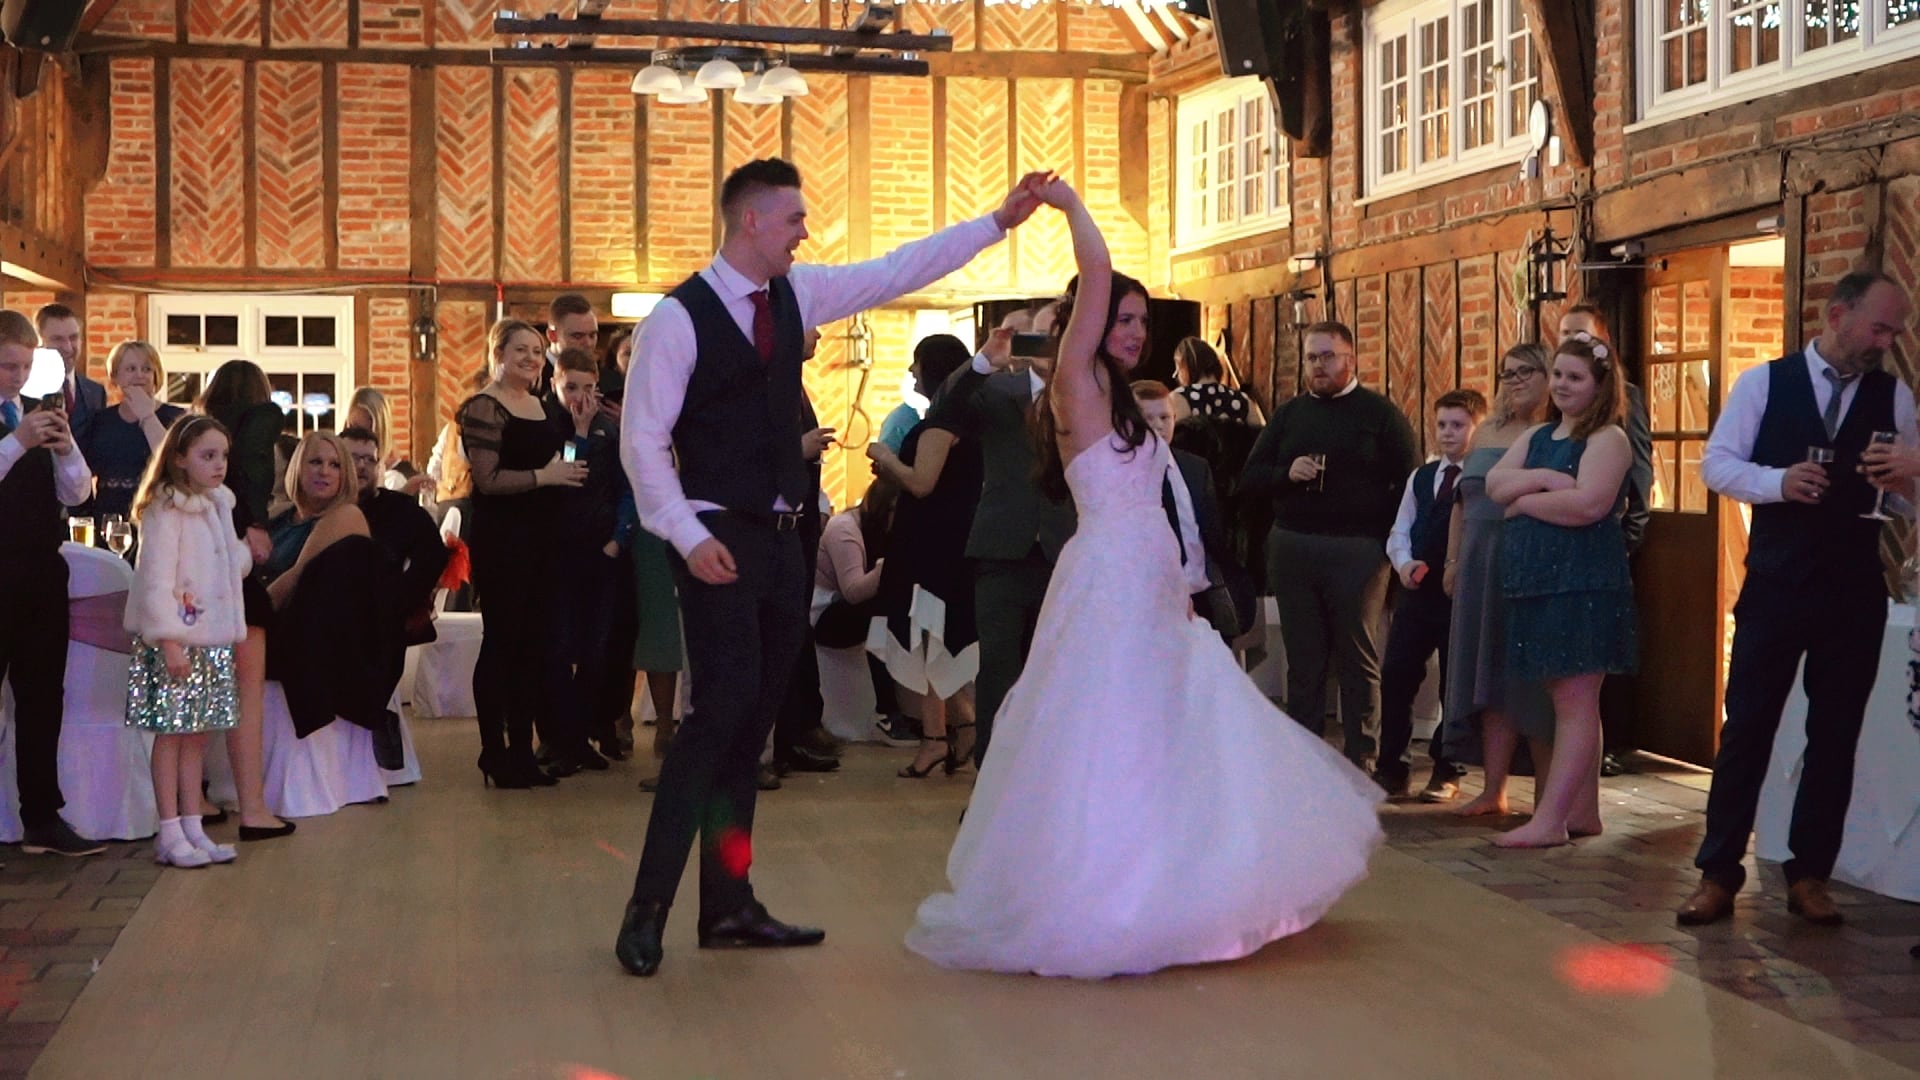 Bride and Groom share first dance at Ye Olde Plough House to Ed Sheeran - Dancing in the Dark